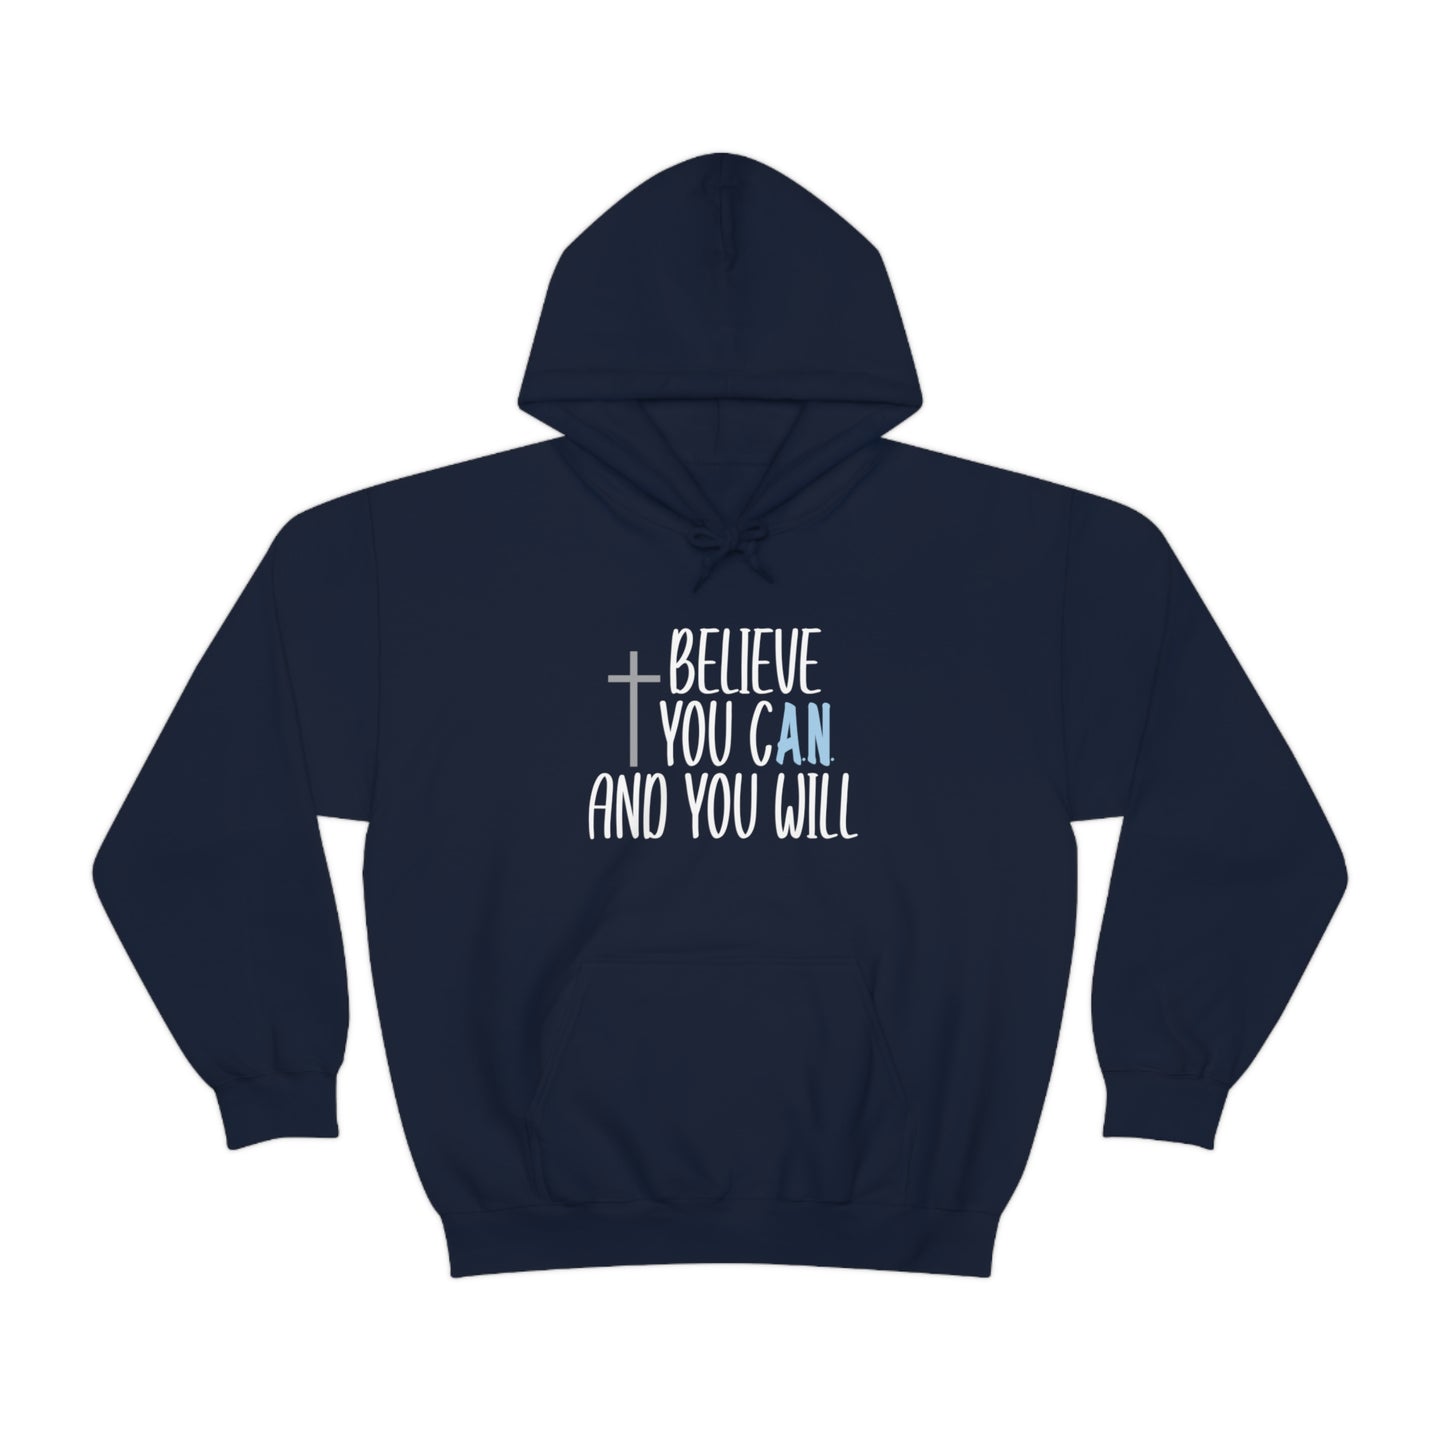 Adrianna Noriega: Believe You Can And You Will Hoodie